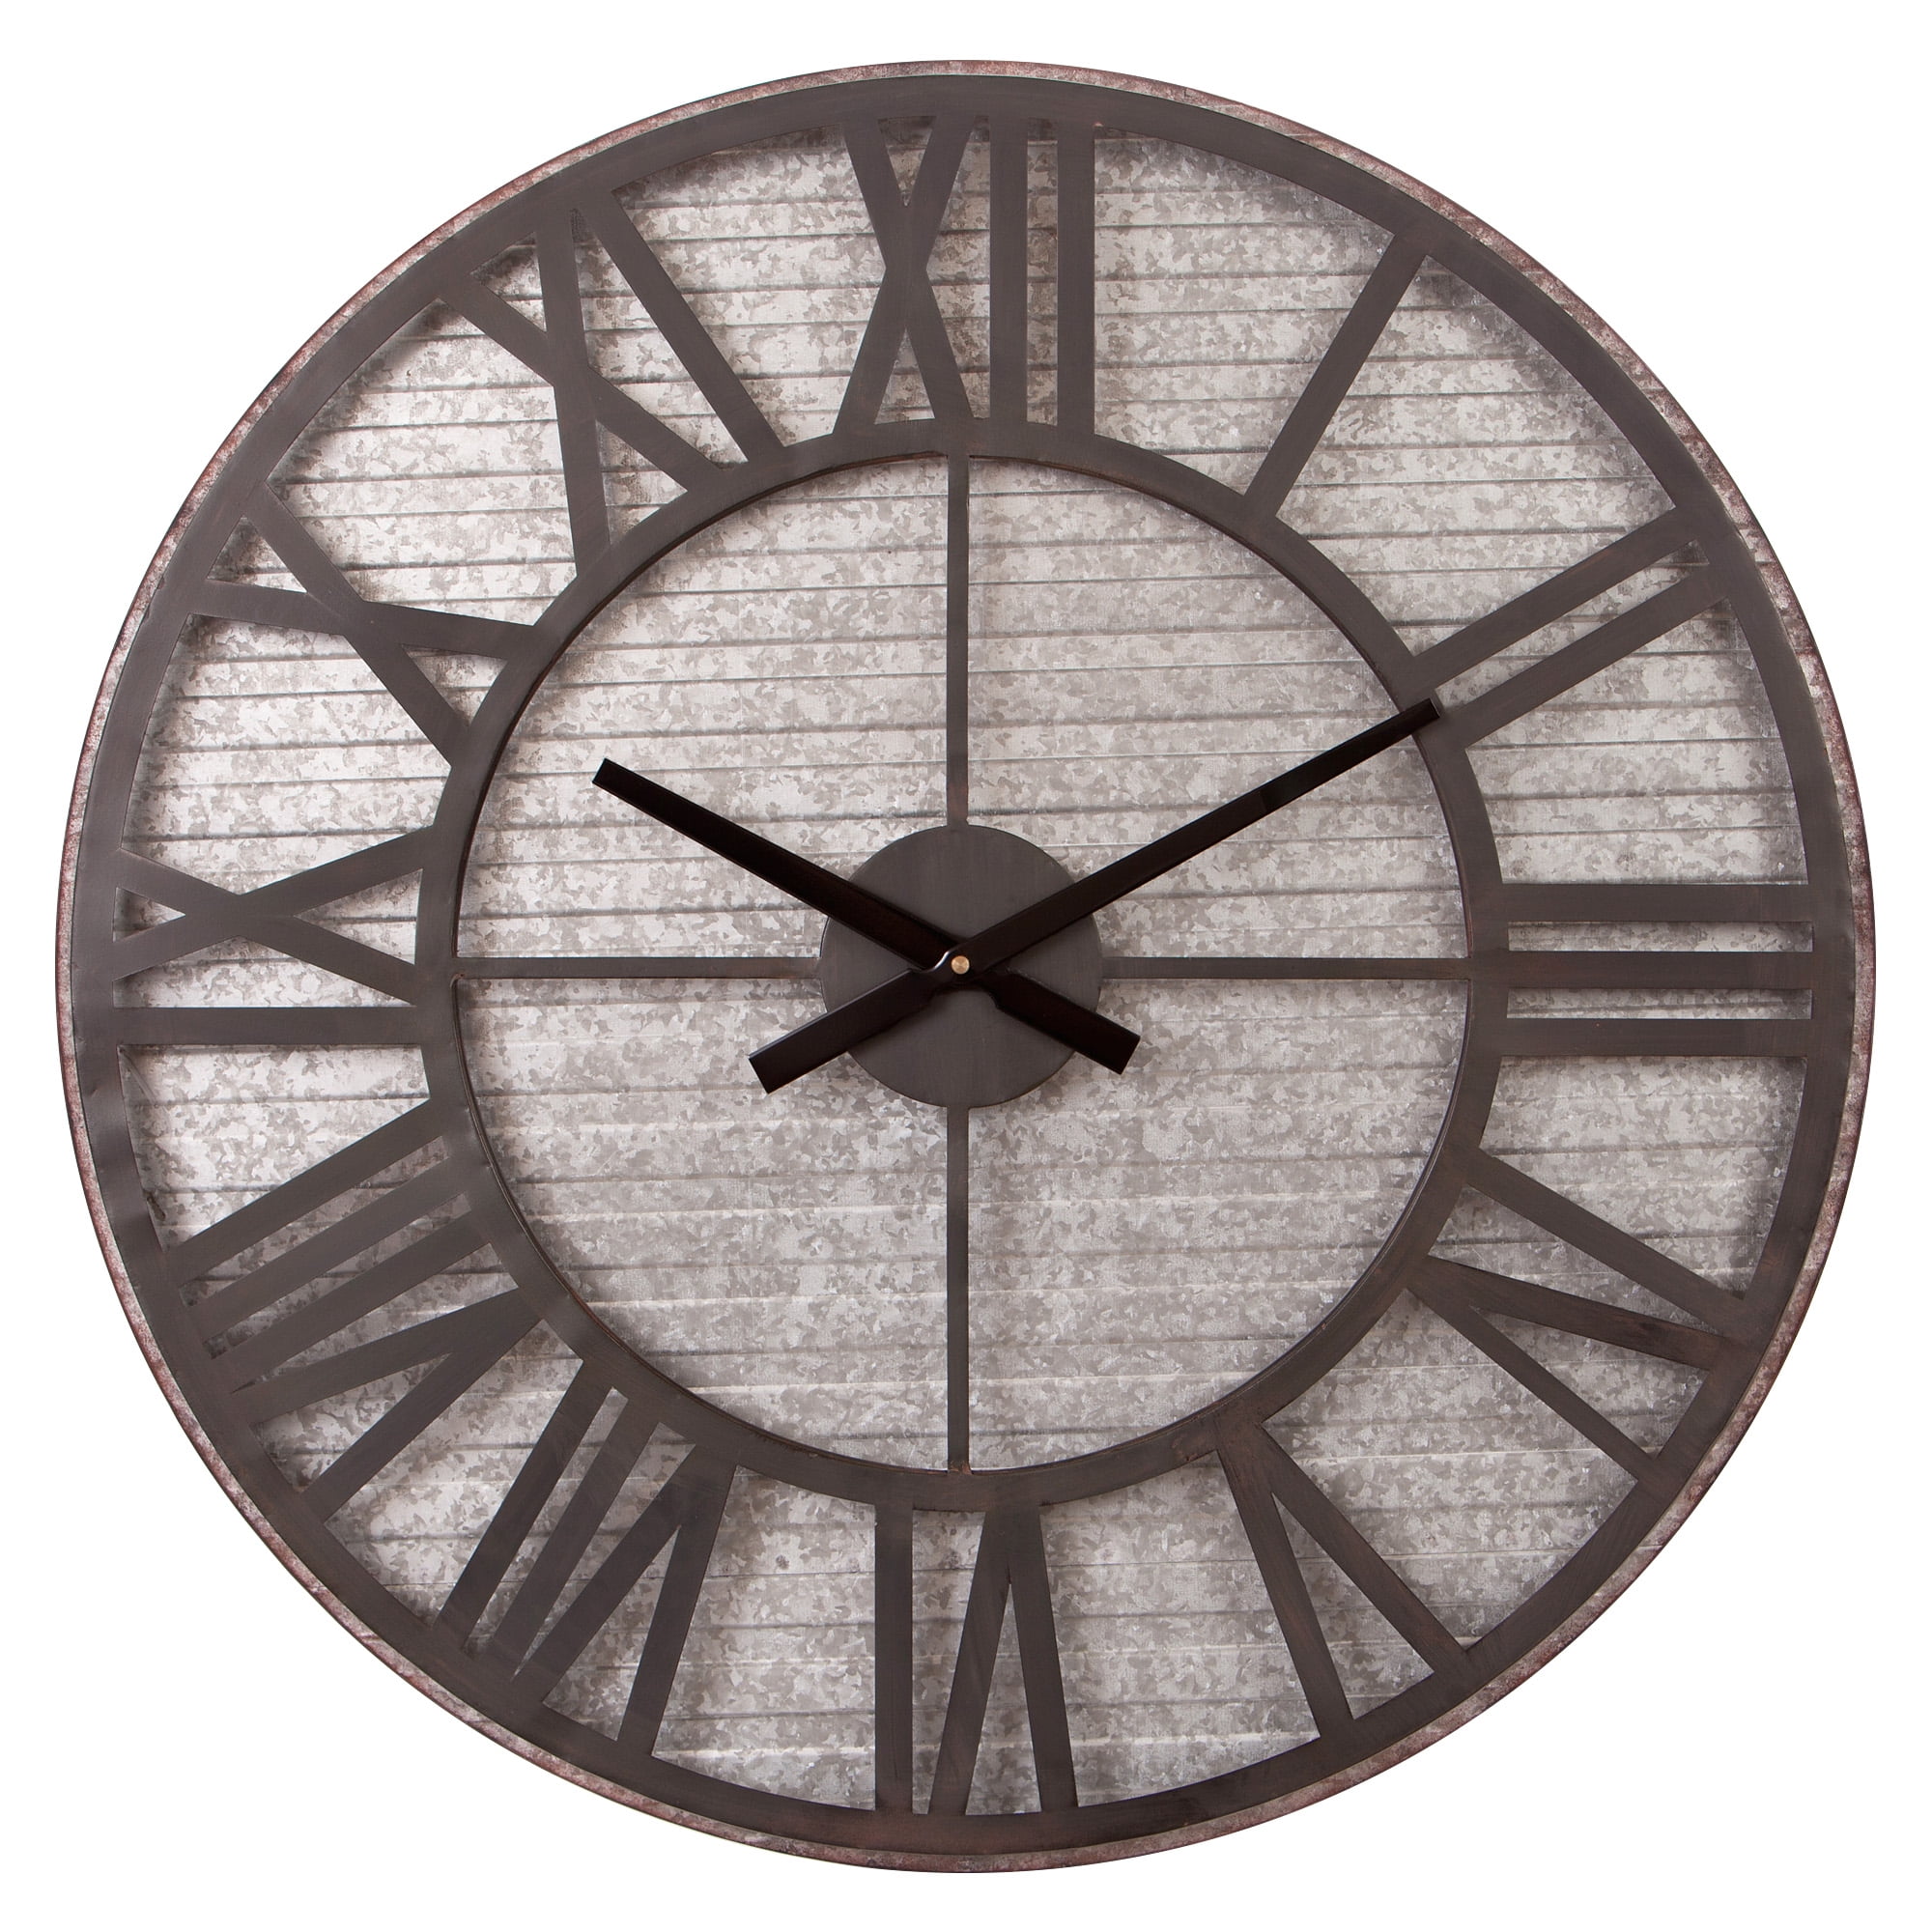 Farmhouse Clock Rustic Country Shabby Chic Distressed Vintage Style Wall Decor 